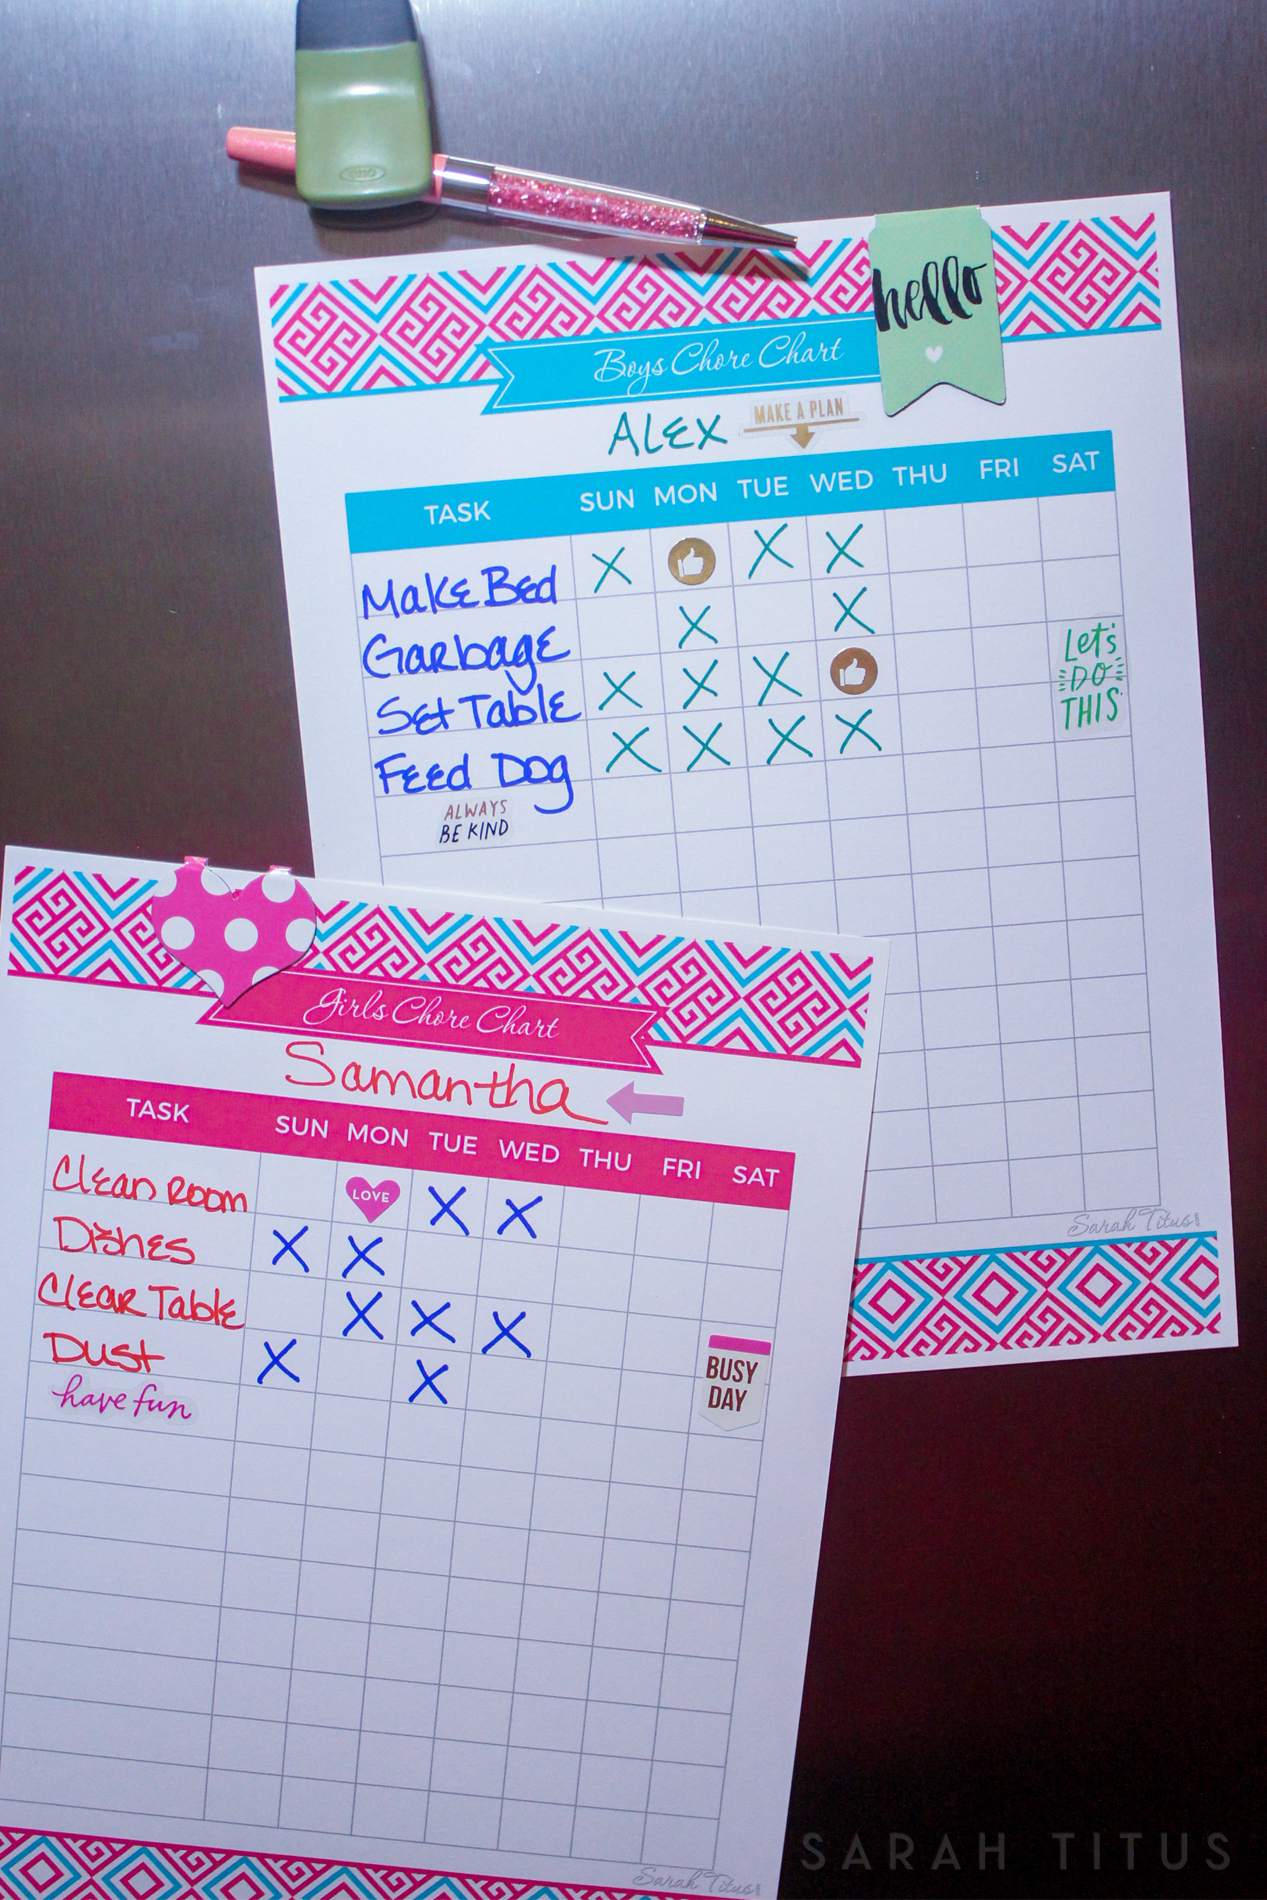 Finding a chore chart is one thing, but getting your kids to actually DO the chores is a completely different ballgame. Creating a chore chart that's right for you includes a free printable chore chart!